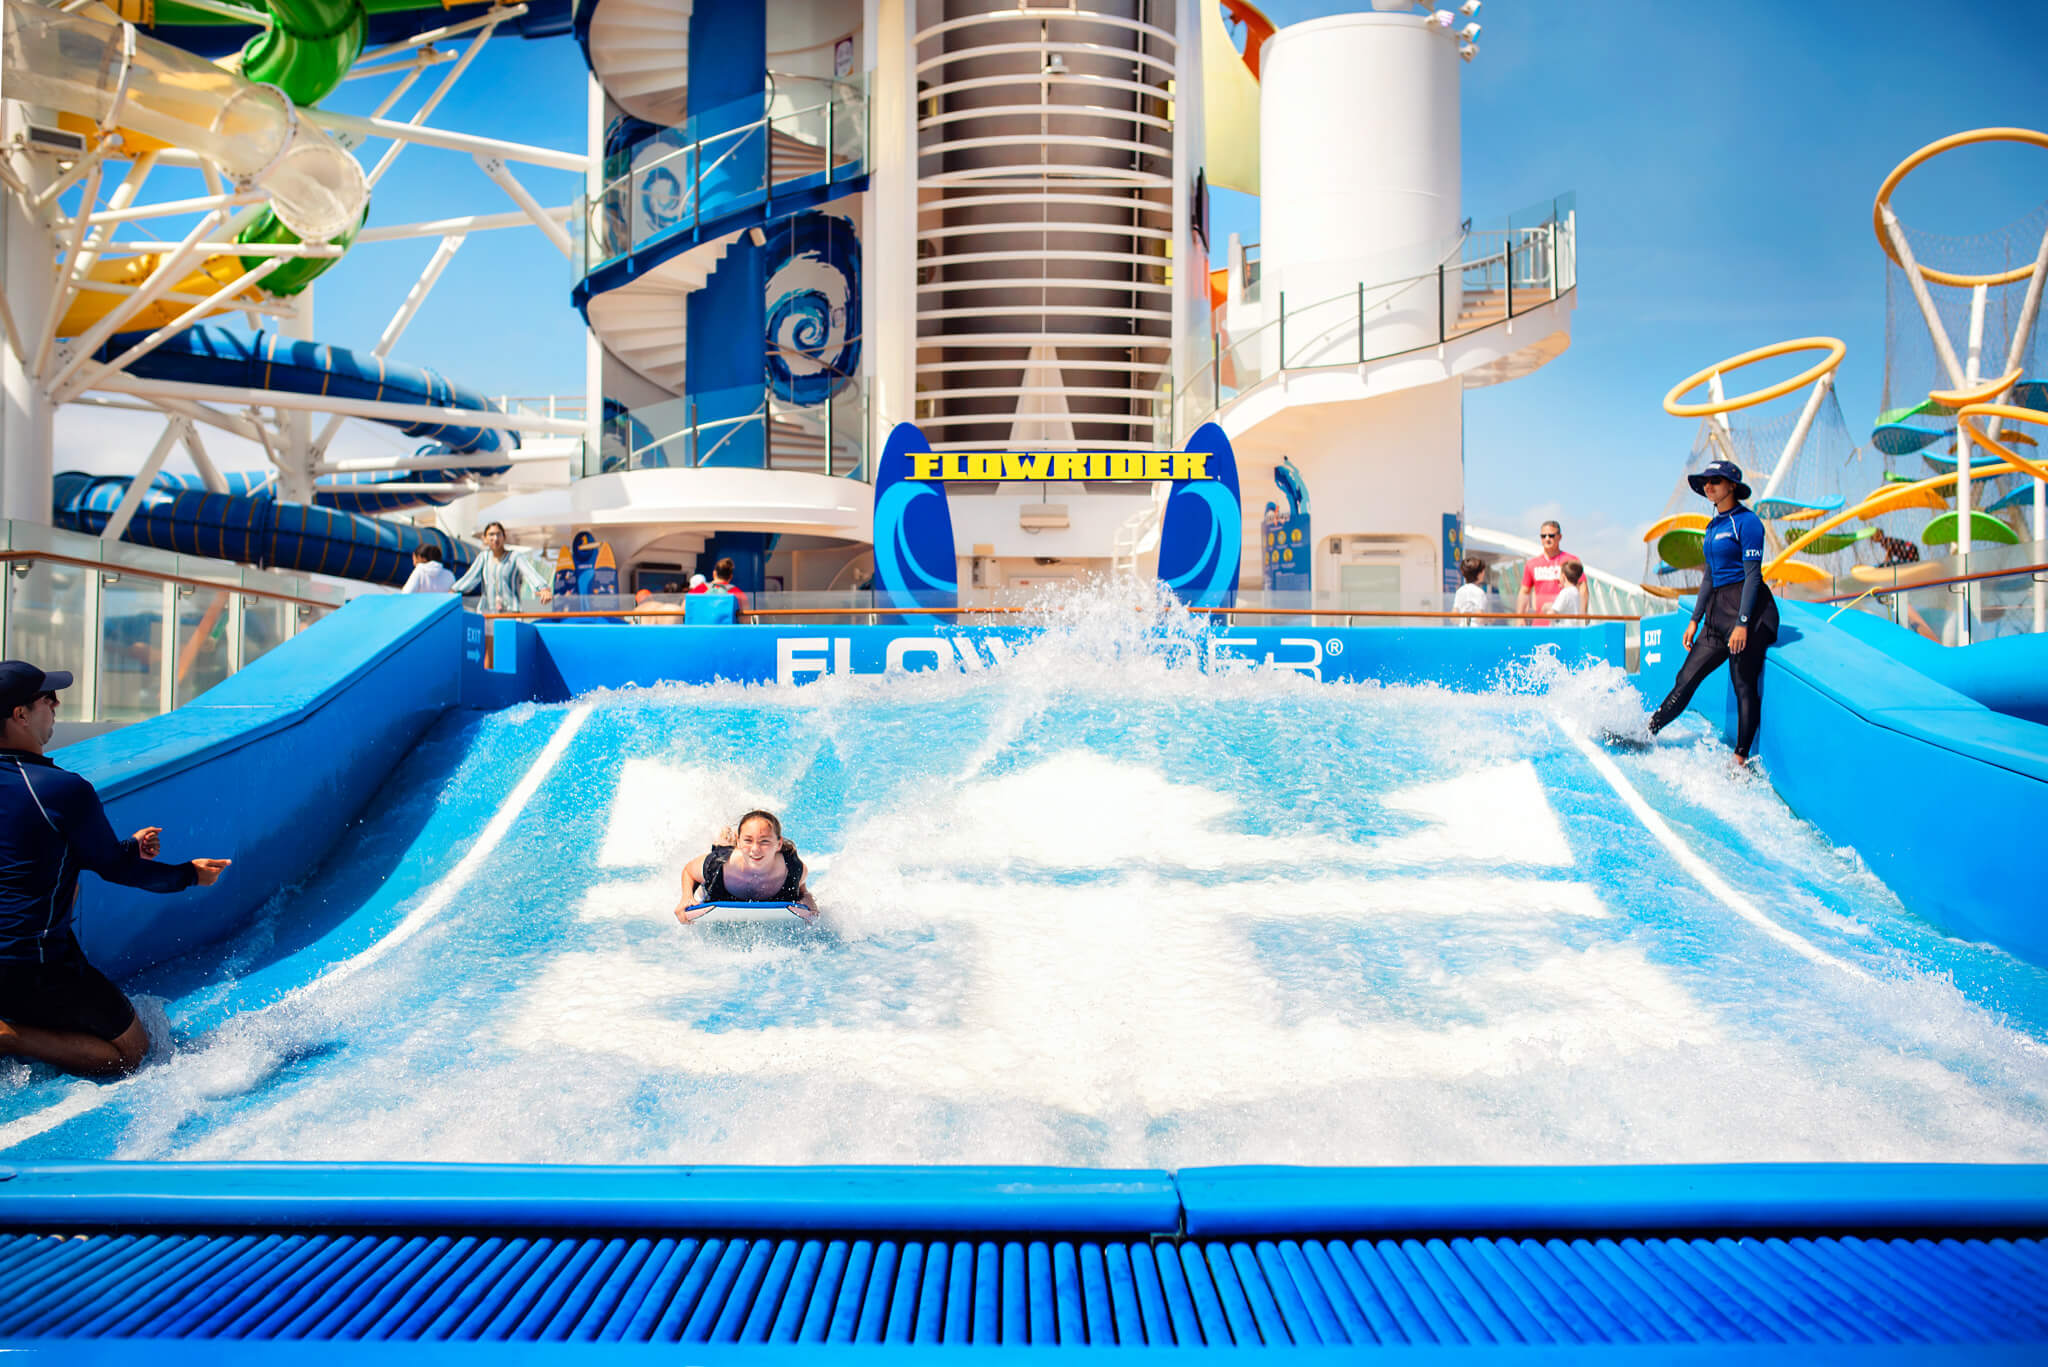 Daily activities on a cruise ship: Flow Rider